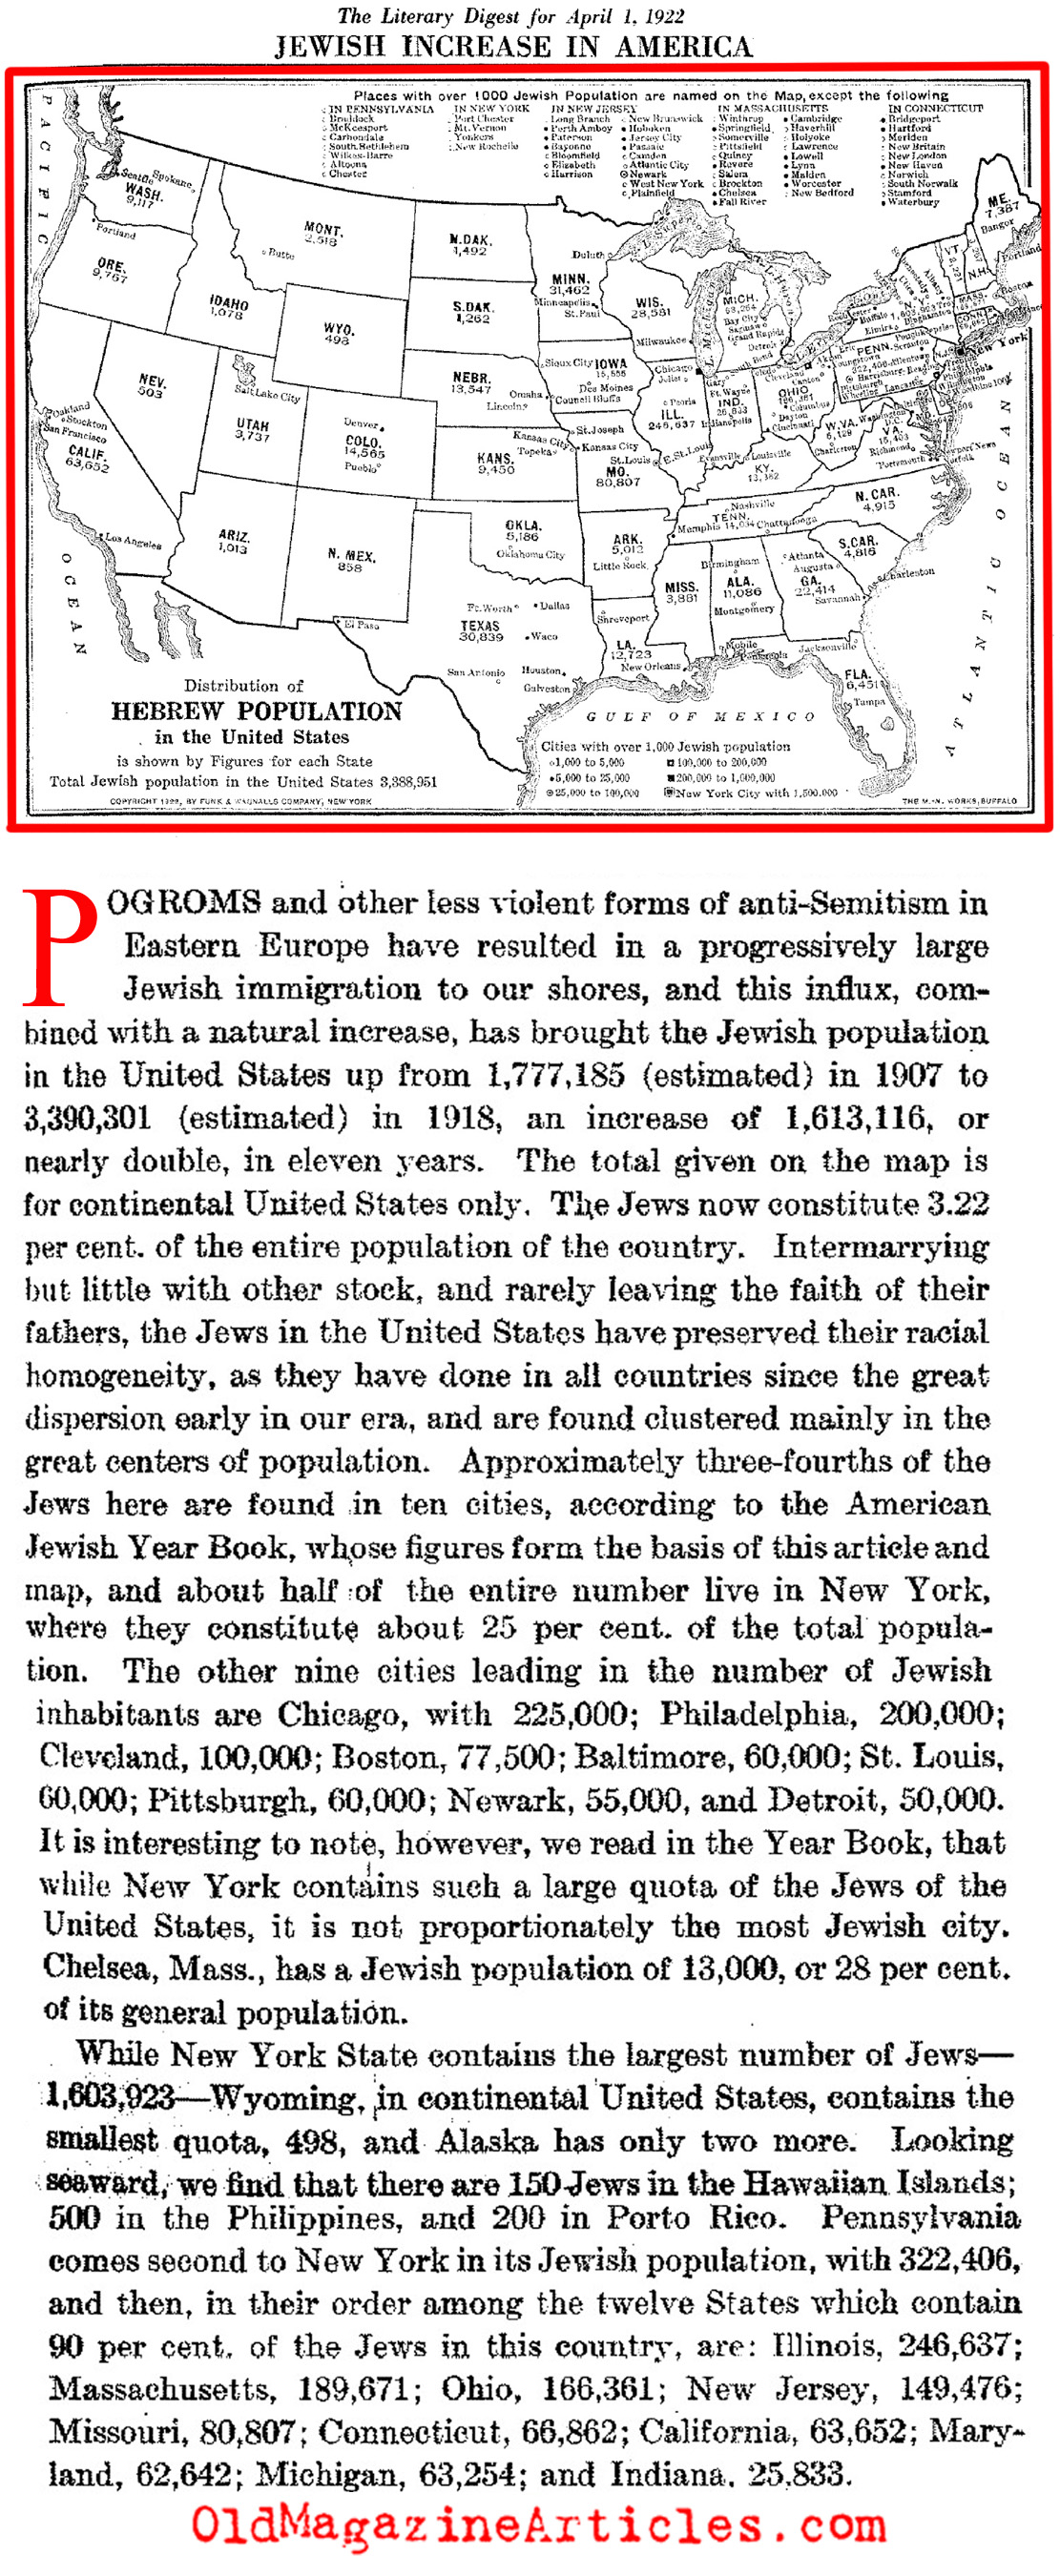 Jewish Population Increase in the U.S.  (The Outlook, 1922)